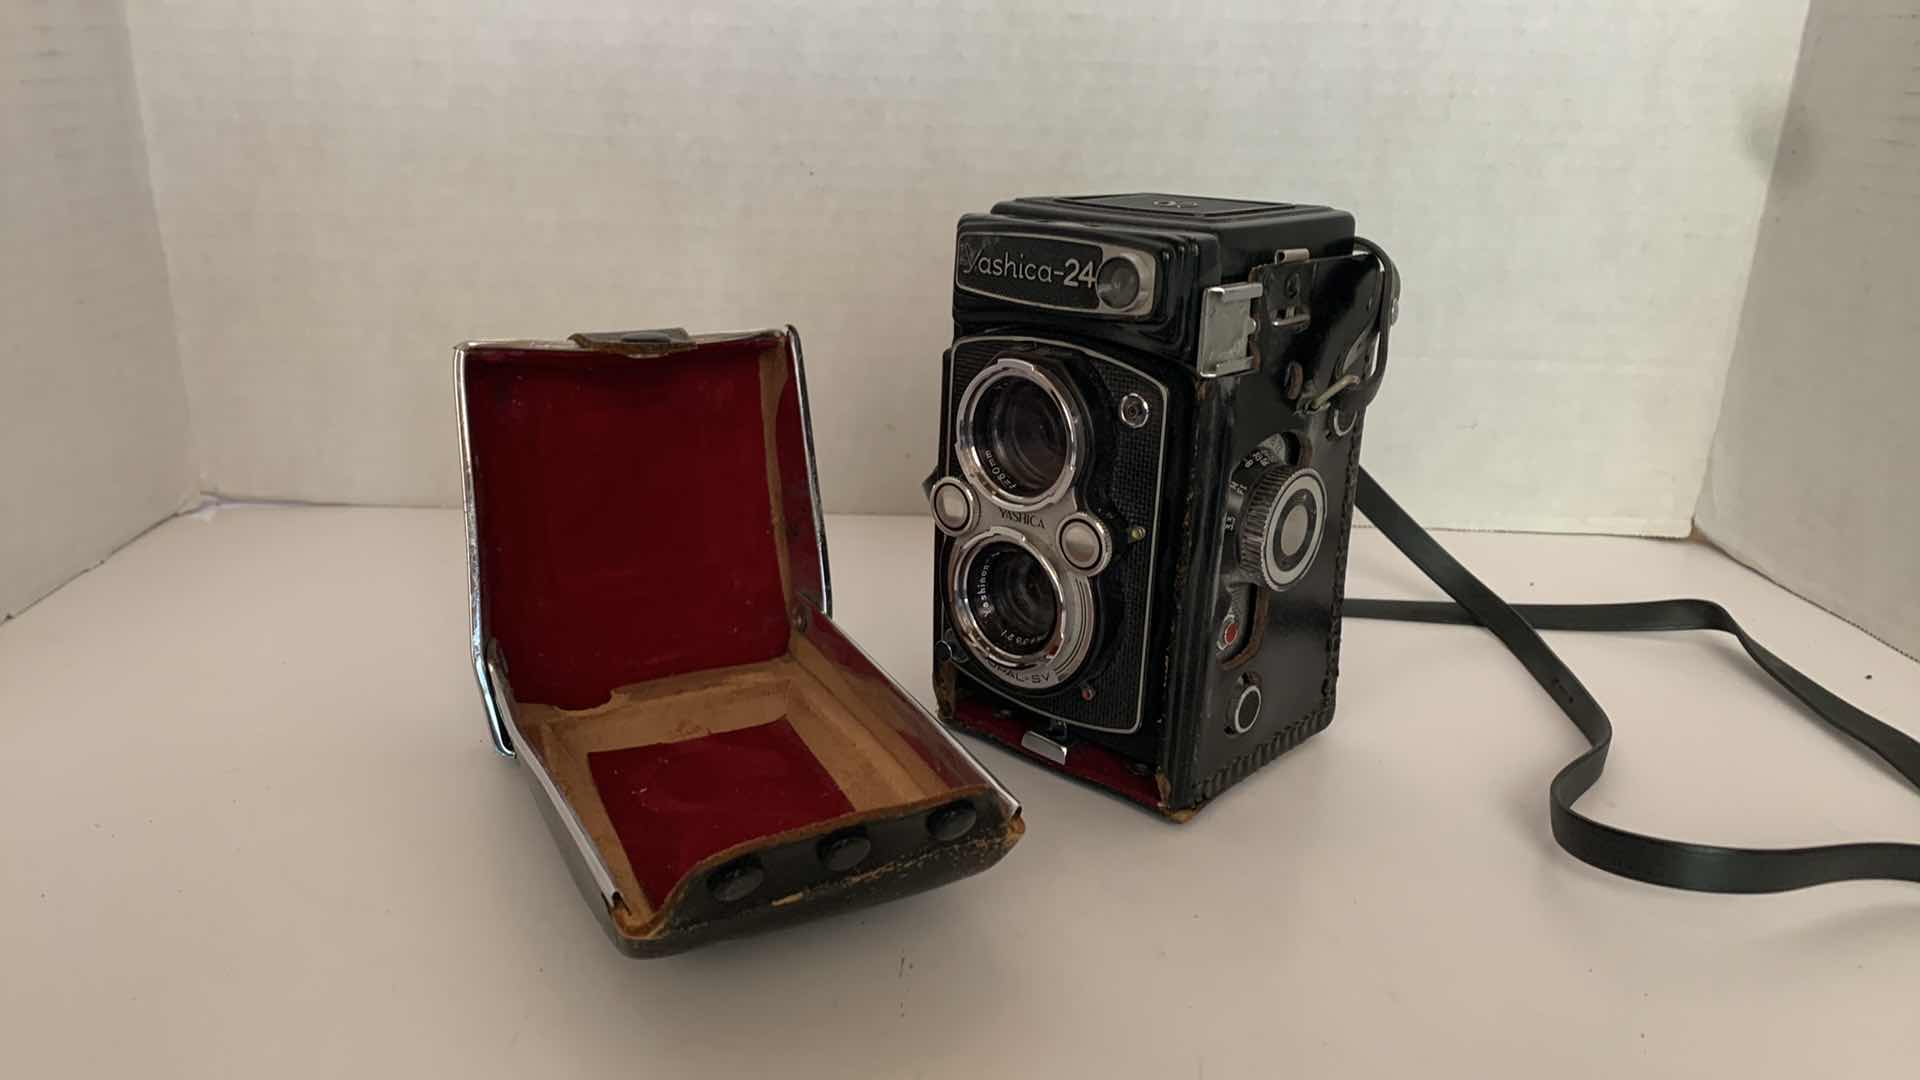 Photo 1 of YASHICA-24 CAMERA WITH CASE